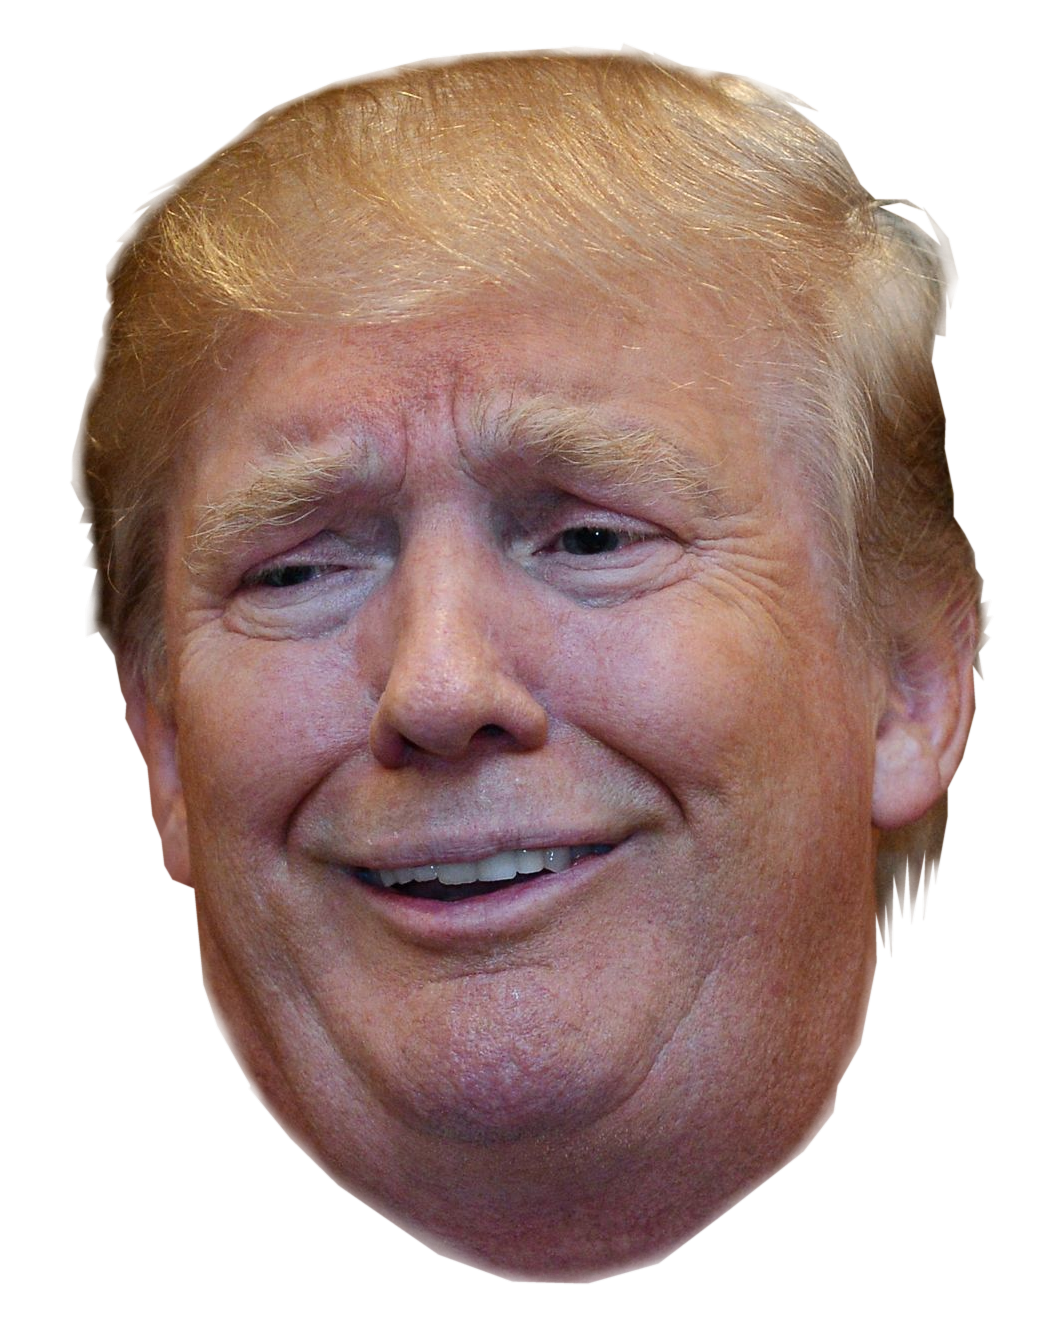 Funny Head Trump Youtube Up Face Donald PNG Image